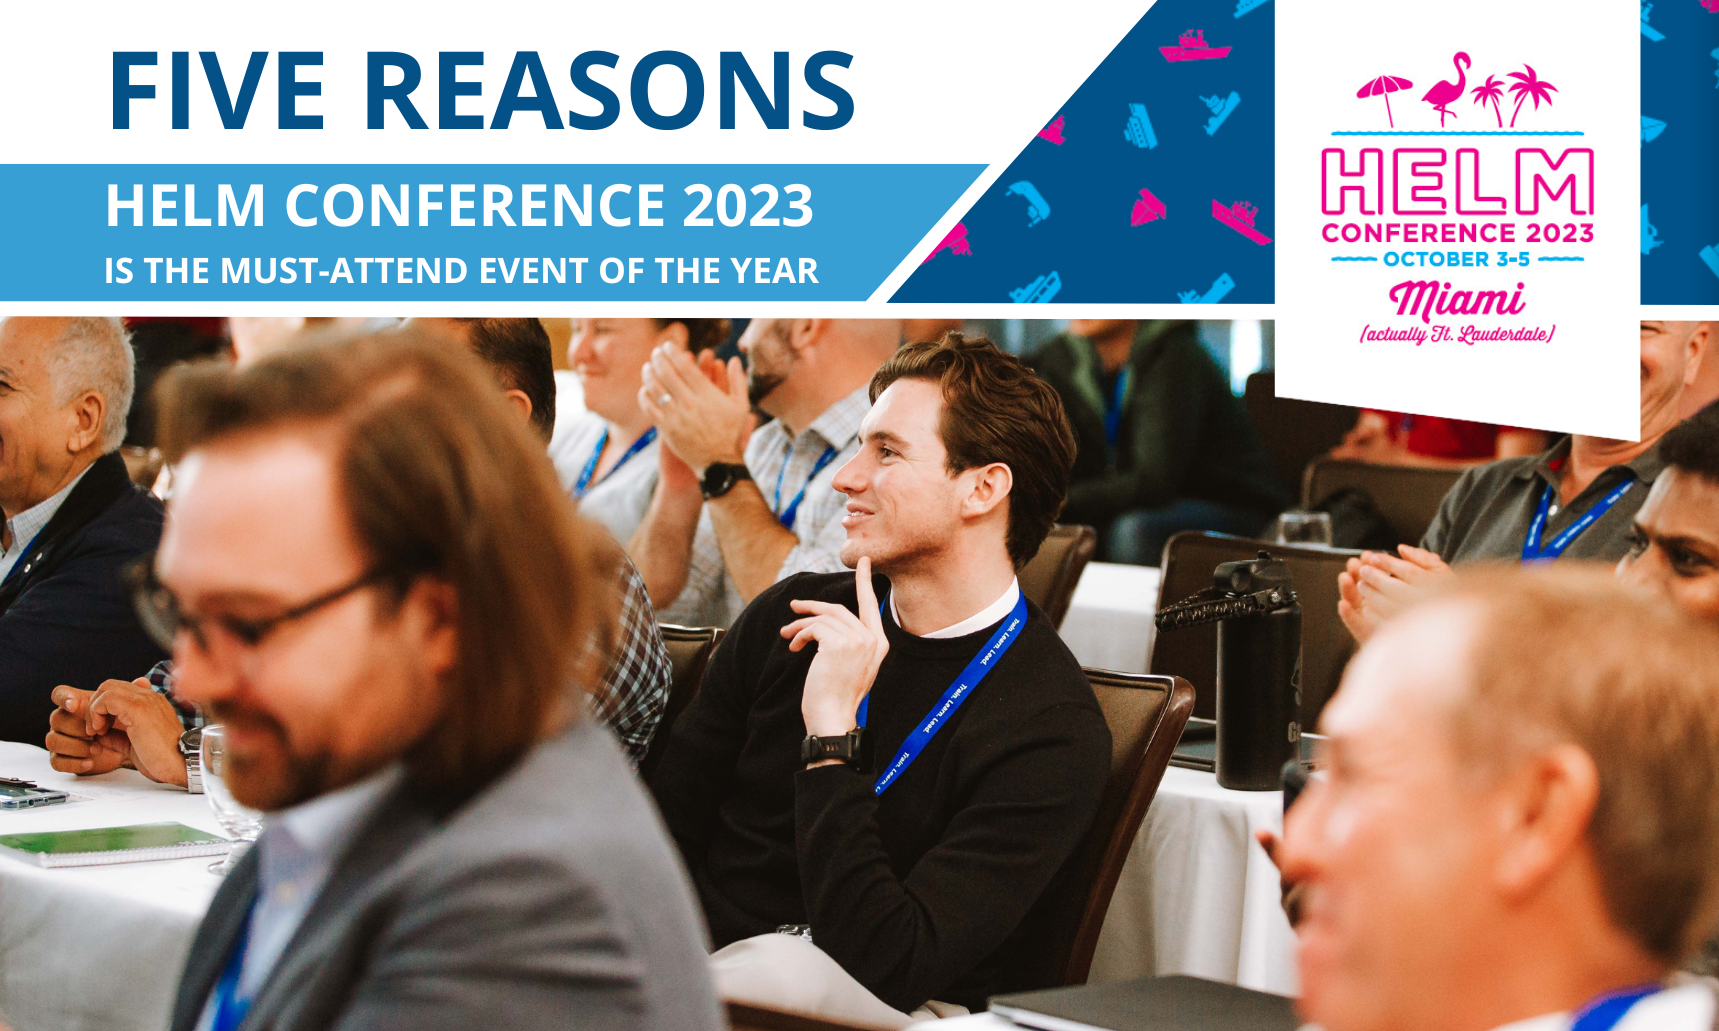 Five Reasons Helm Conference 2023 is the Must-Attend Event of the Year.